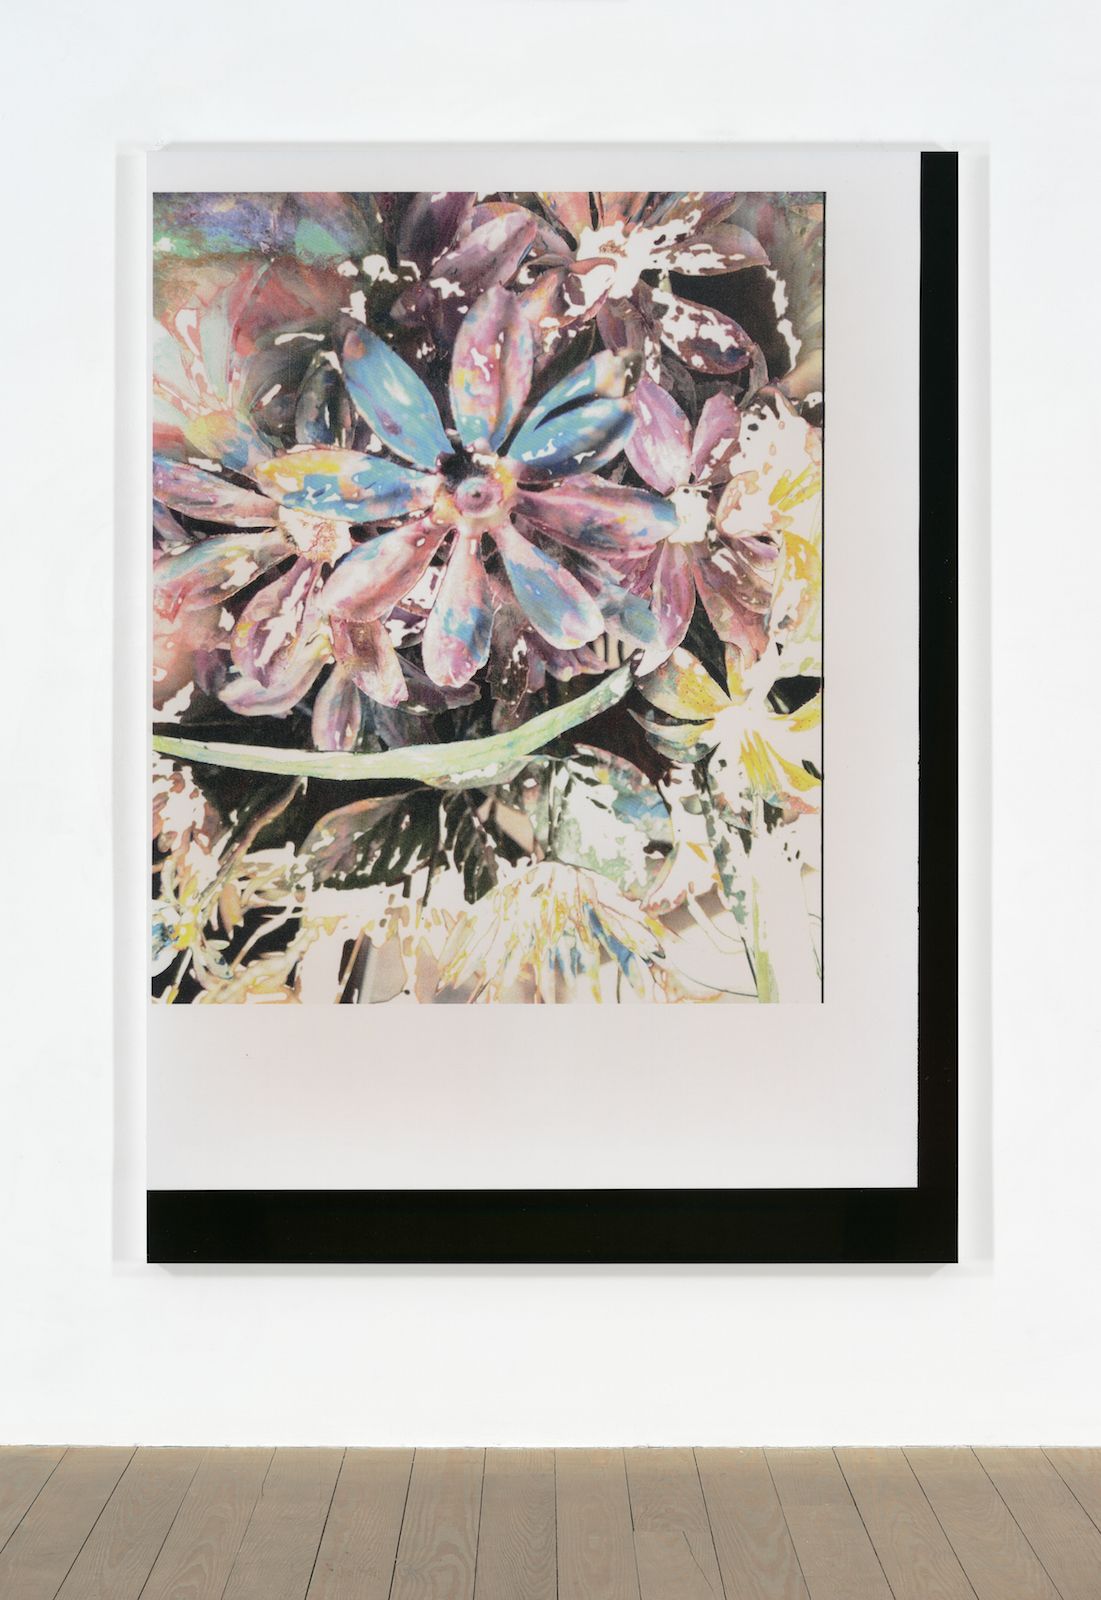 Travess Smalley, Untitled (Feb_24_2015_Floral_LuluBook_Scan 1), 2015, UV coated digital pigment print mounted on aluminum frame, 81 1⁄2  × 59 1⁄2  × 1 1⁄2  in. ( 207.01  × 151.13  × 3.81  cm)